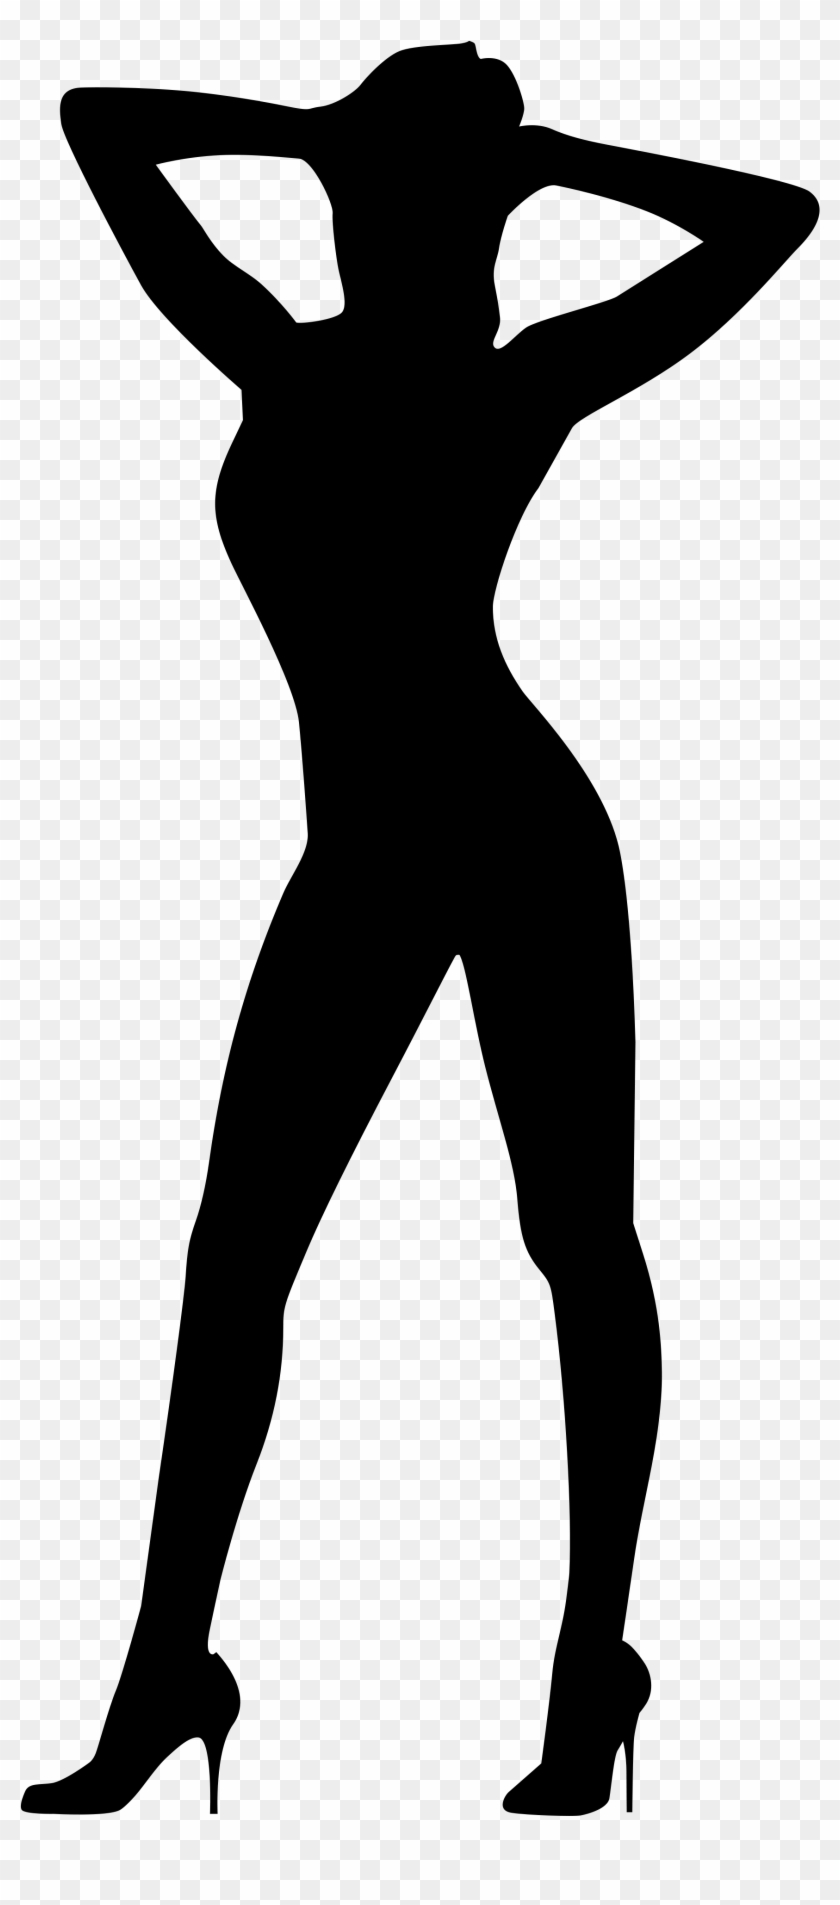 Silhouette Of A Woman - Sexy Girl Silhouette Png #359524